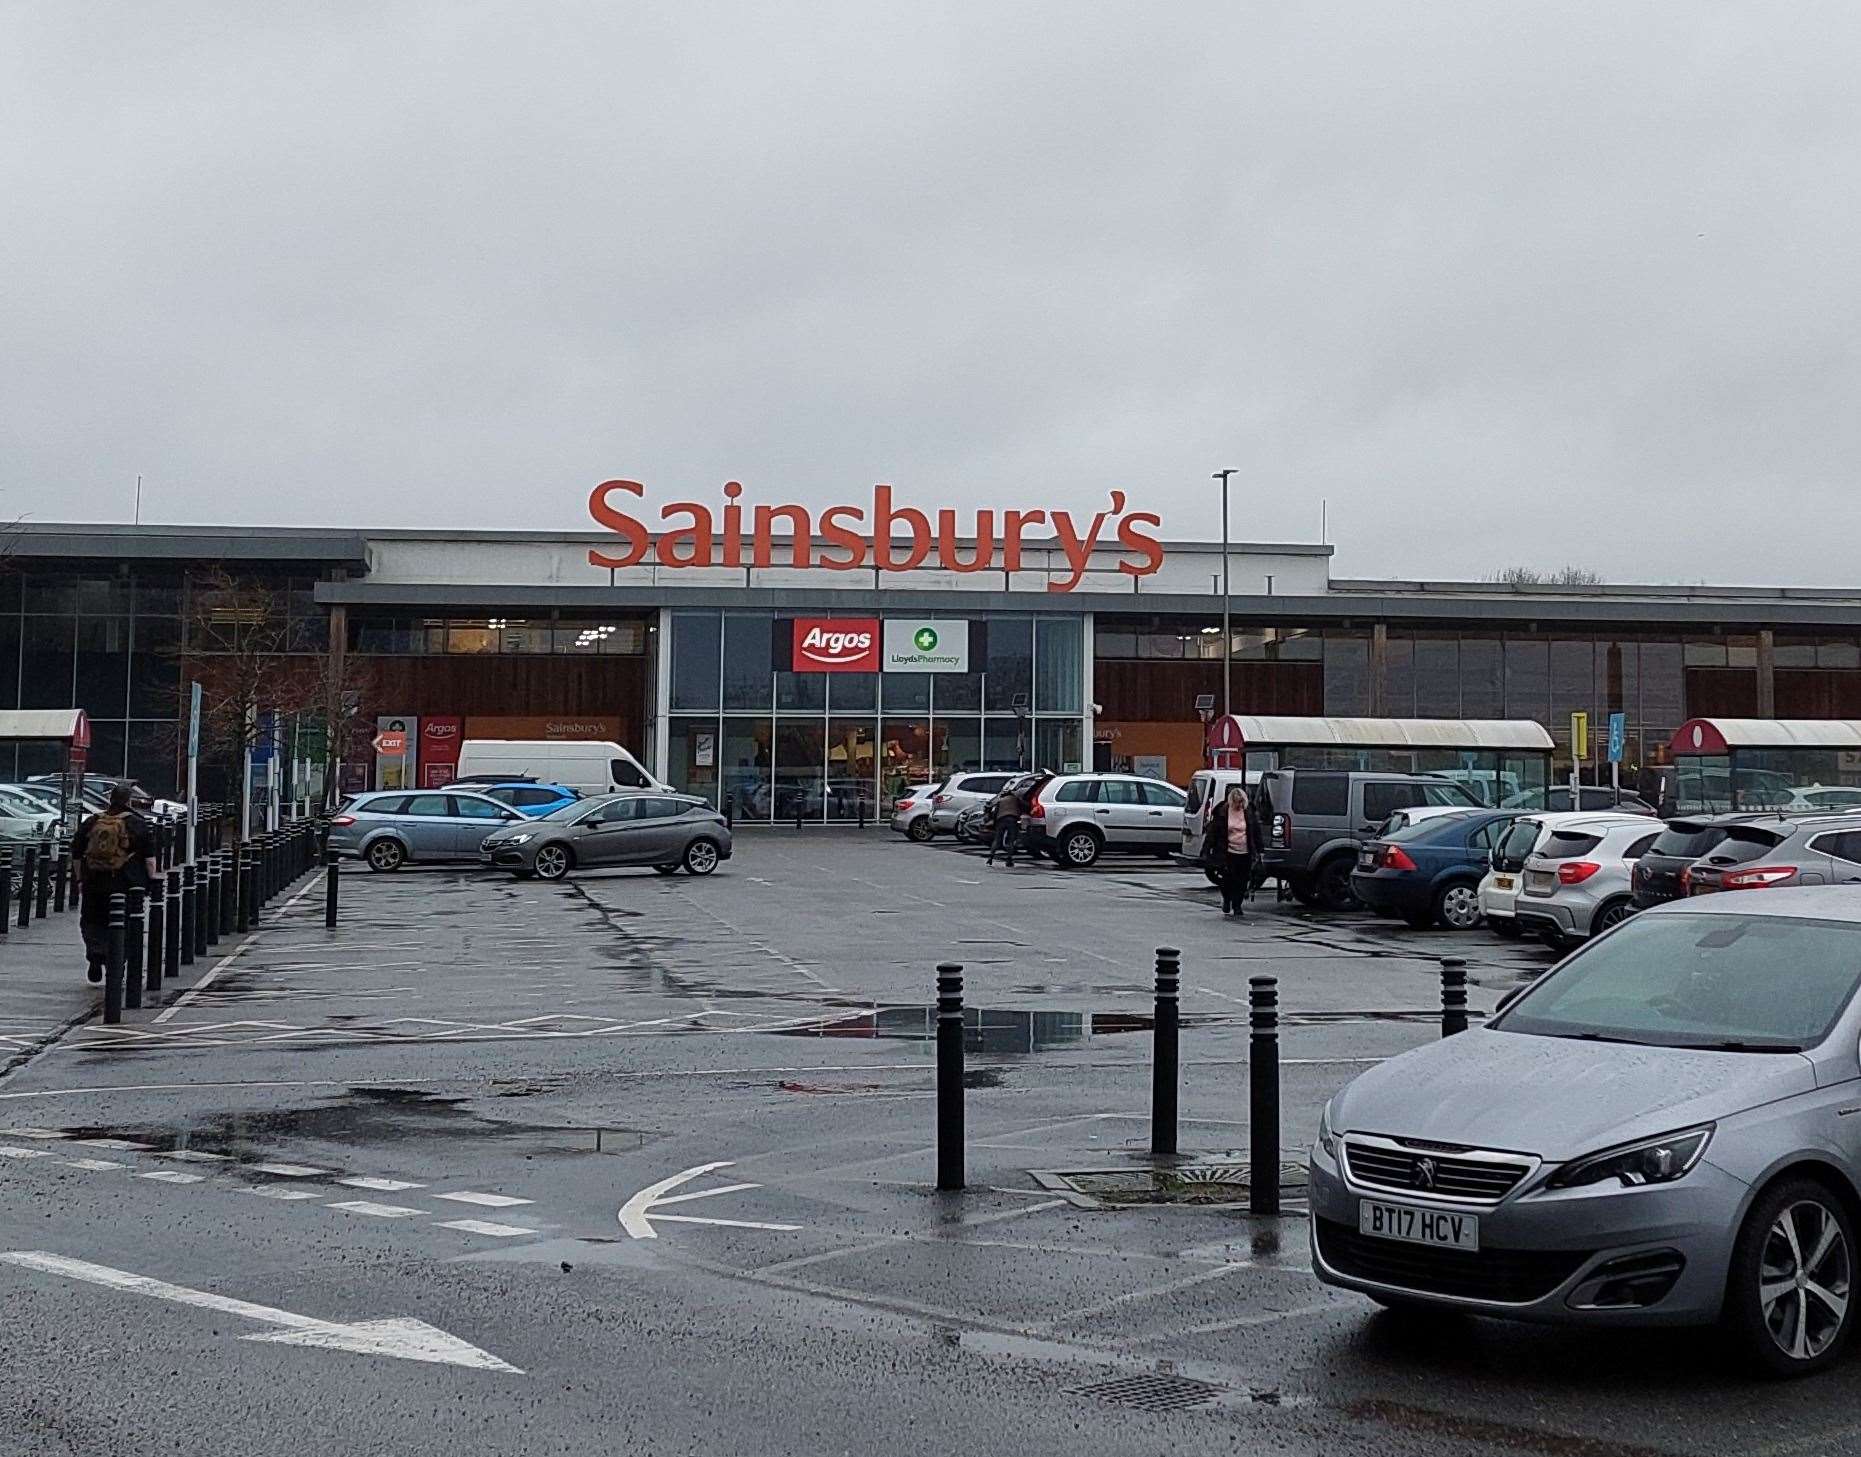 The tragedy occurred at Sainsbury’s off Simone Weil Avenue in Ashford